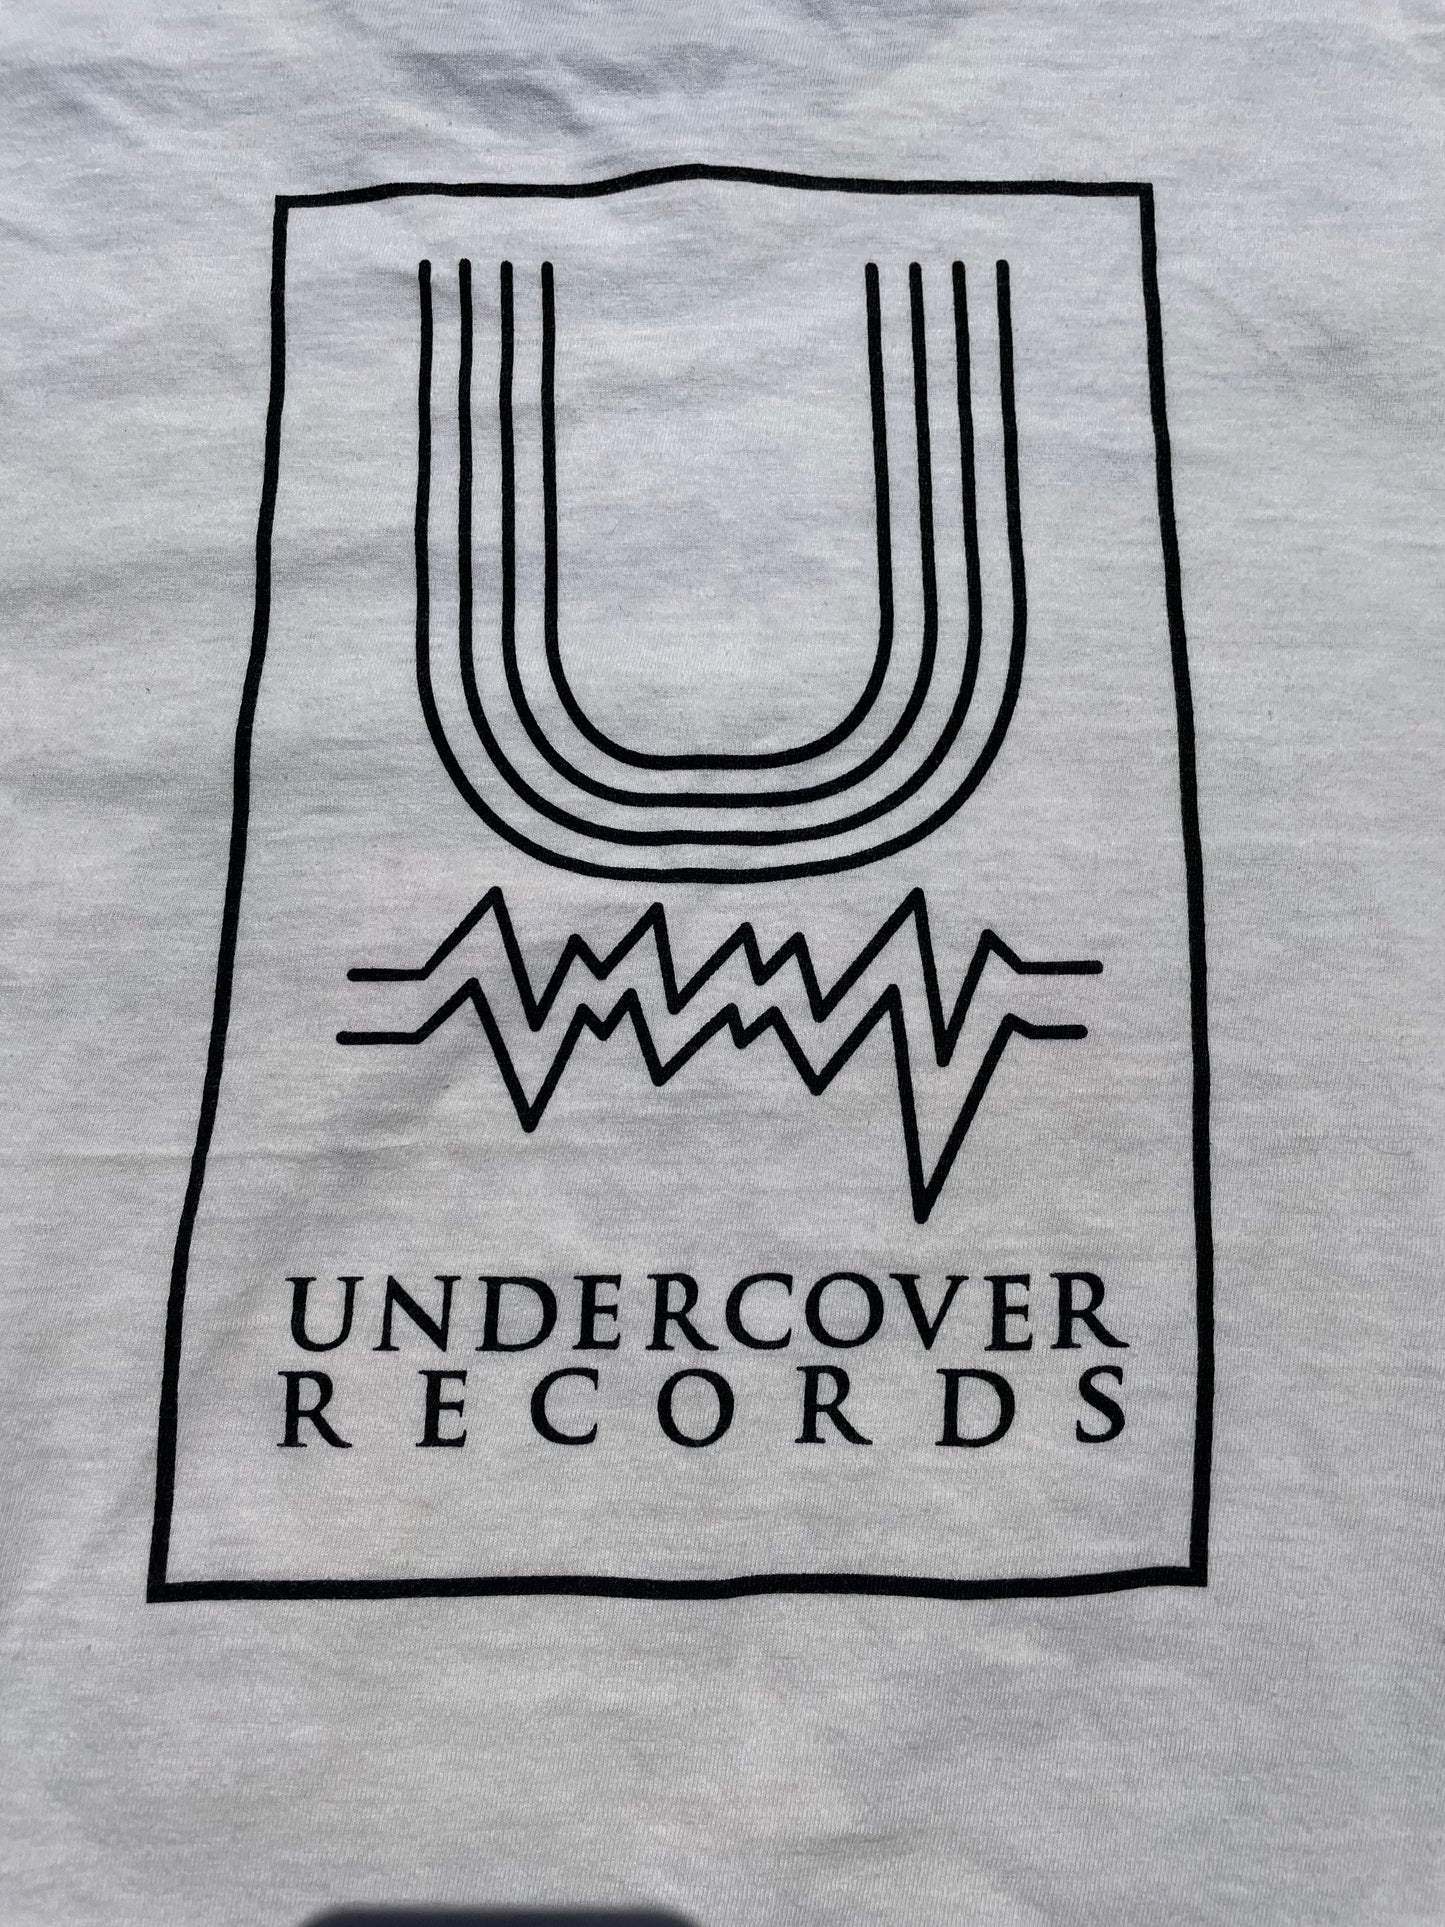 SS06 “T” - Undercover Records ‘The Greatest Hits‘ Band T-Shirt